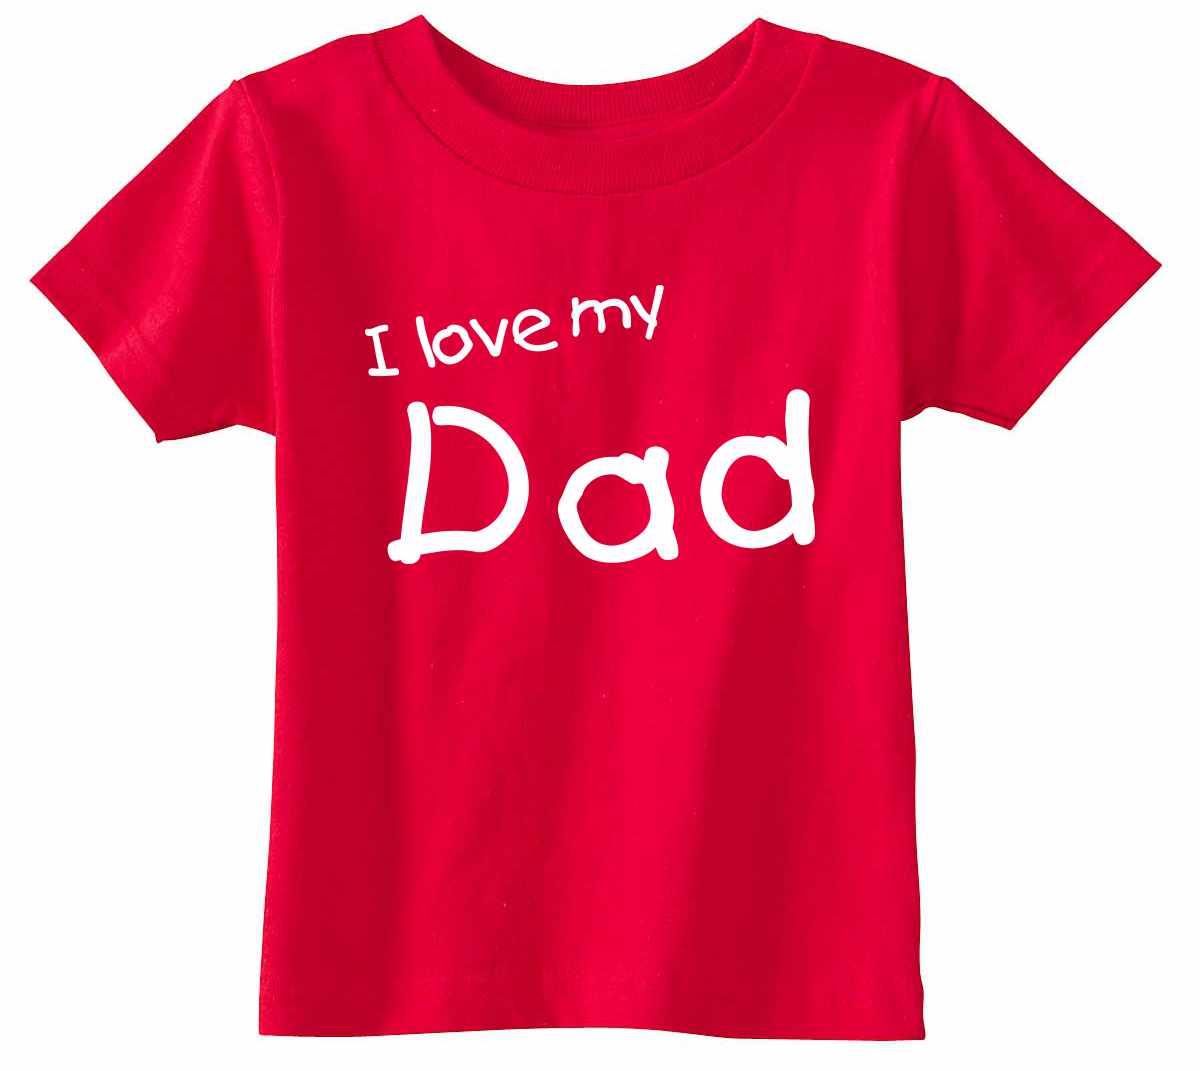 I Love My Dad on Infant-Toddler T-Shirt (#1210-7)